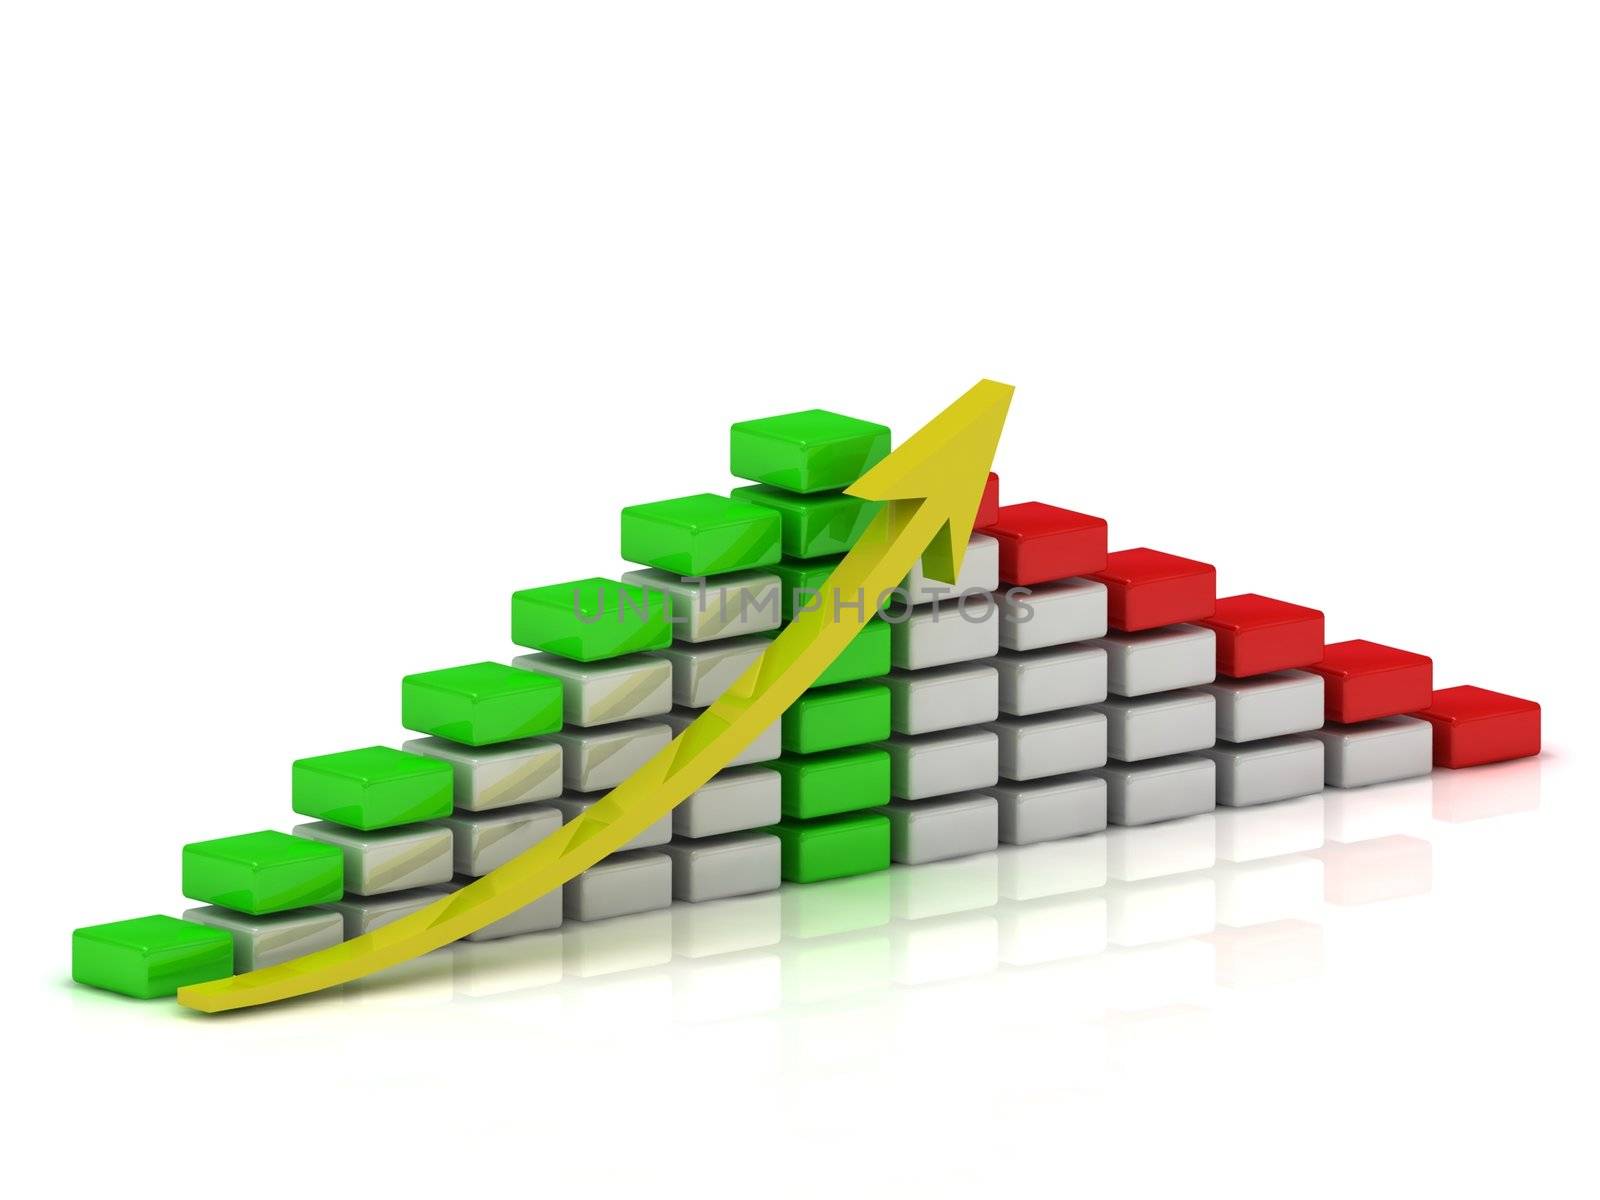 Business growth chart of the white, red and green blocks with a yellow arrow